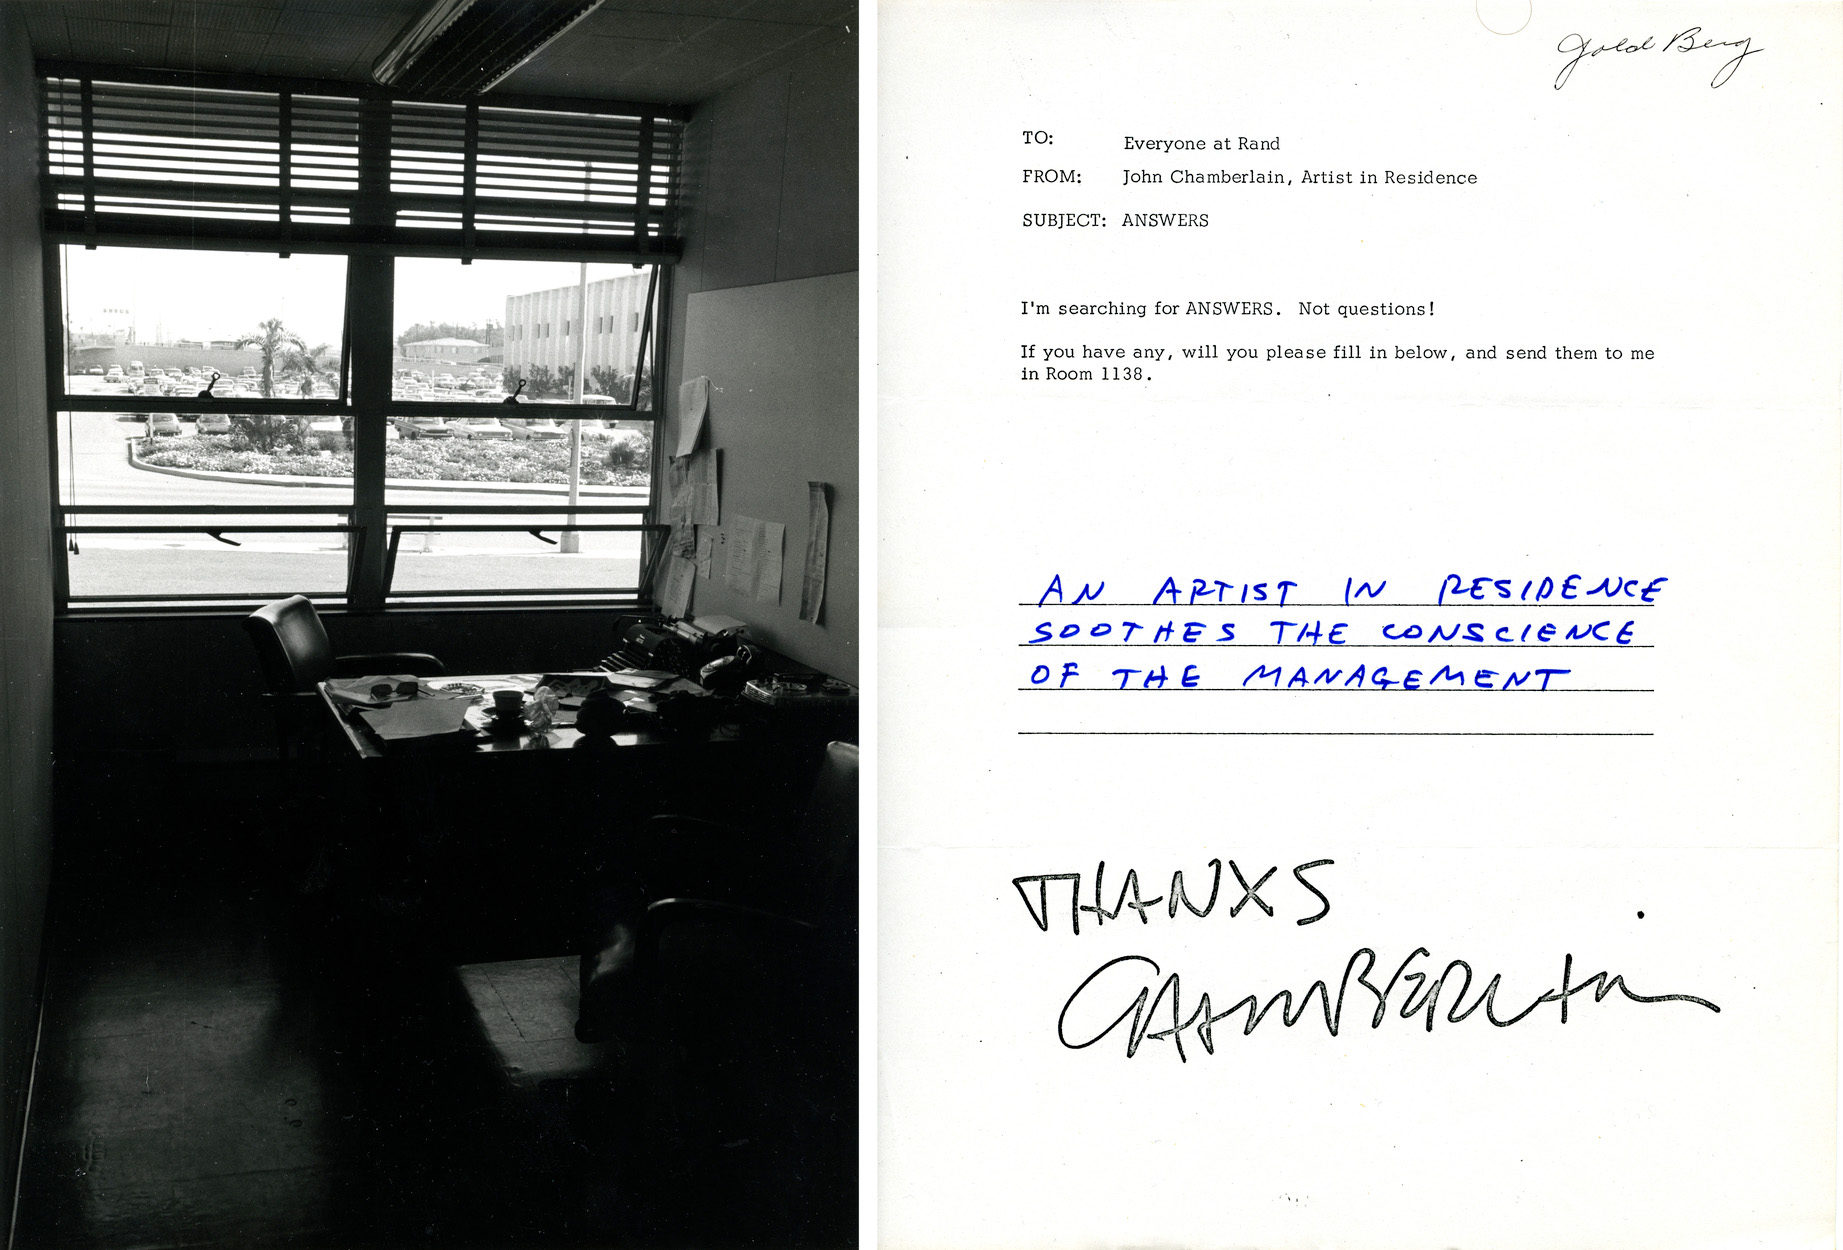 Left: Chamberlain's office at Rand. Photo © Barbara Crutchfield, courtesy LACMA archives. Right: A questionnaire seeking answers sent to the employees of Rand Corporation by Chamberlain as part of his Art and Technology piece, <i>Rand Piece</i>, 1970. Copyright: © 2015 John Chamberlain / Artists Rights Society (ARS), New York. Photo © Museum Associates/ LACMA